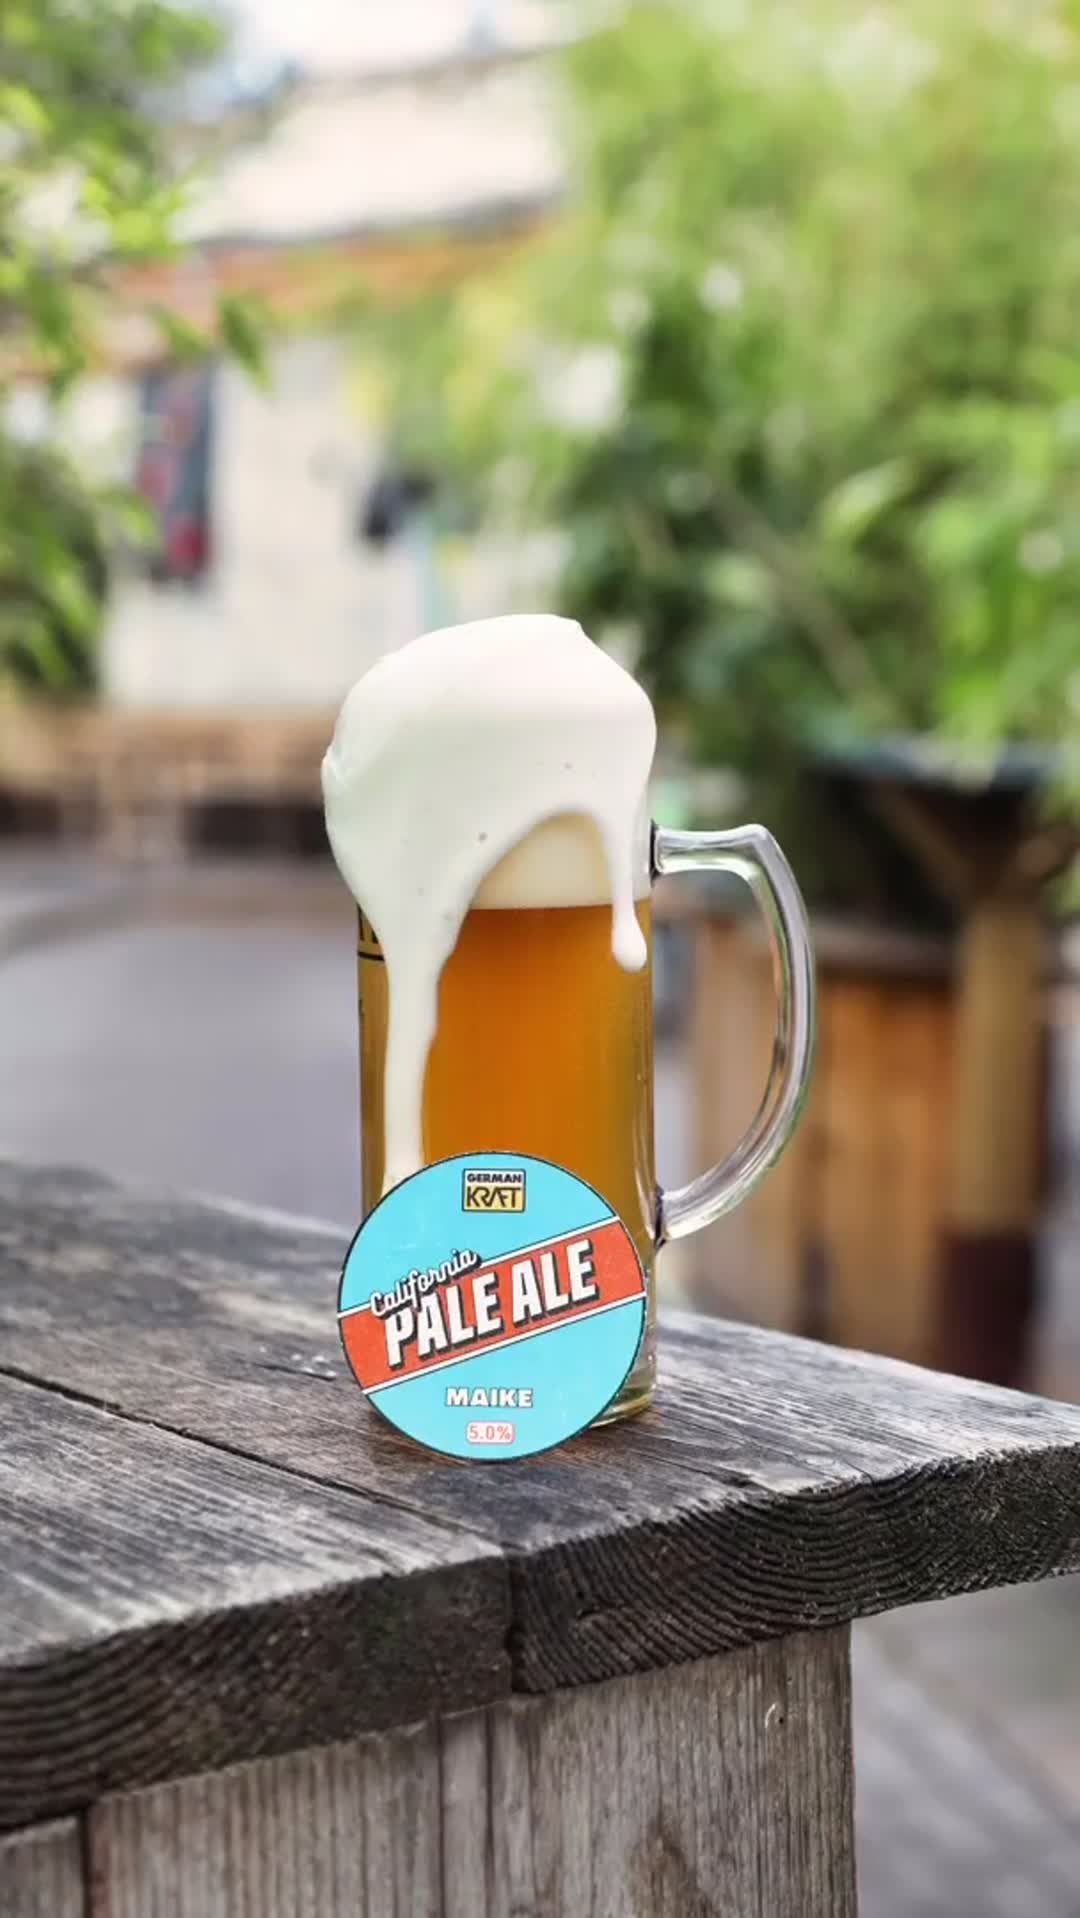 Maike - Core range Pale Ale 5% 🌲🍊

A traditionally piney west coast pale ale with notes of orange peel and a apricot jam undertone, rocking a dry and crisp finish.